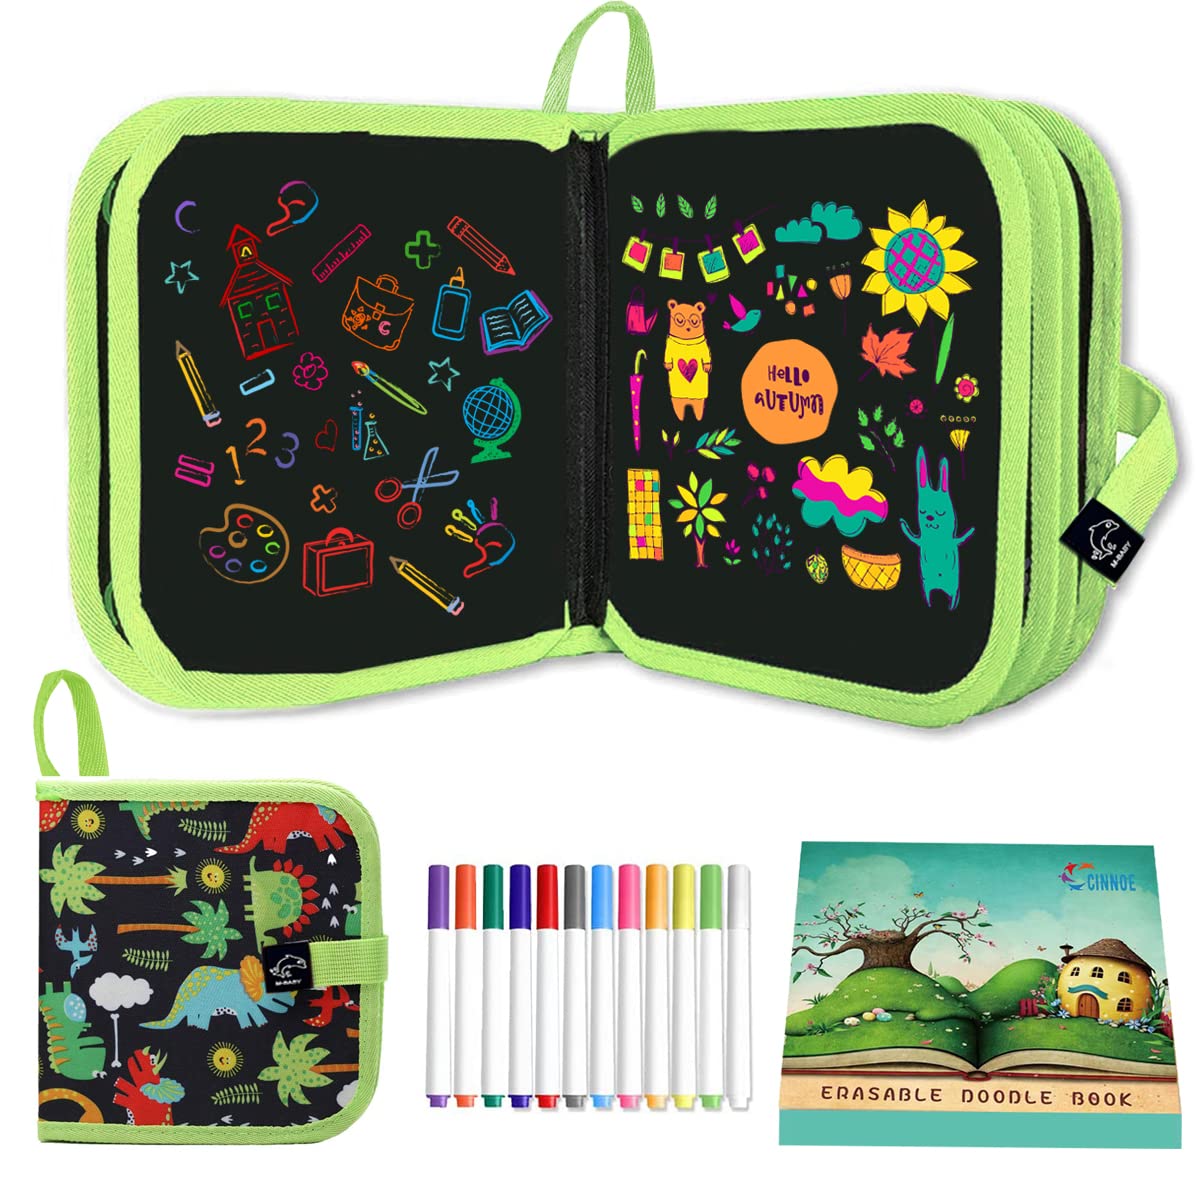 (🎅EARLY CHRISTMAS SALE - 48%OFF NOW) Kids Erasable Doodle Book Set - BUY 2 GET 1 FREE NOW!